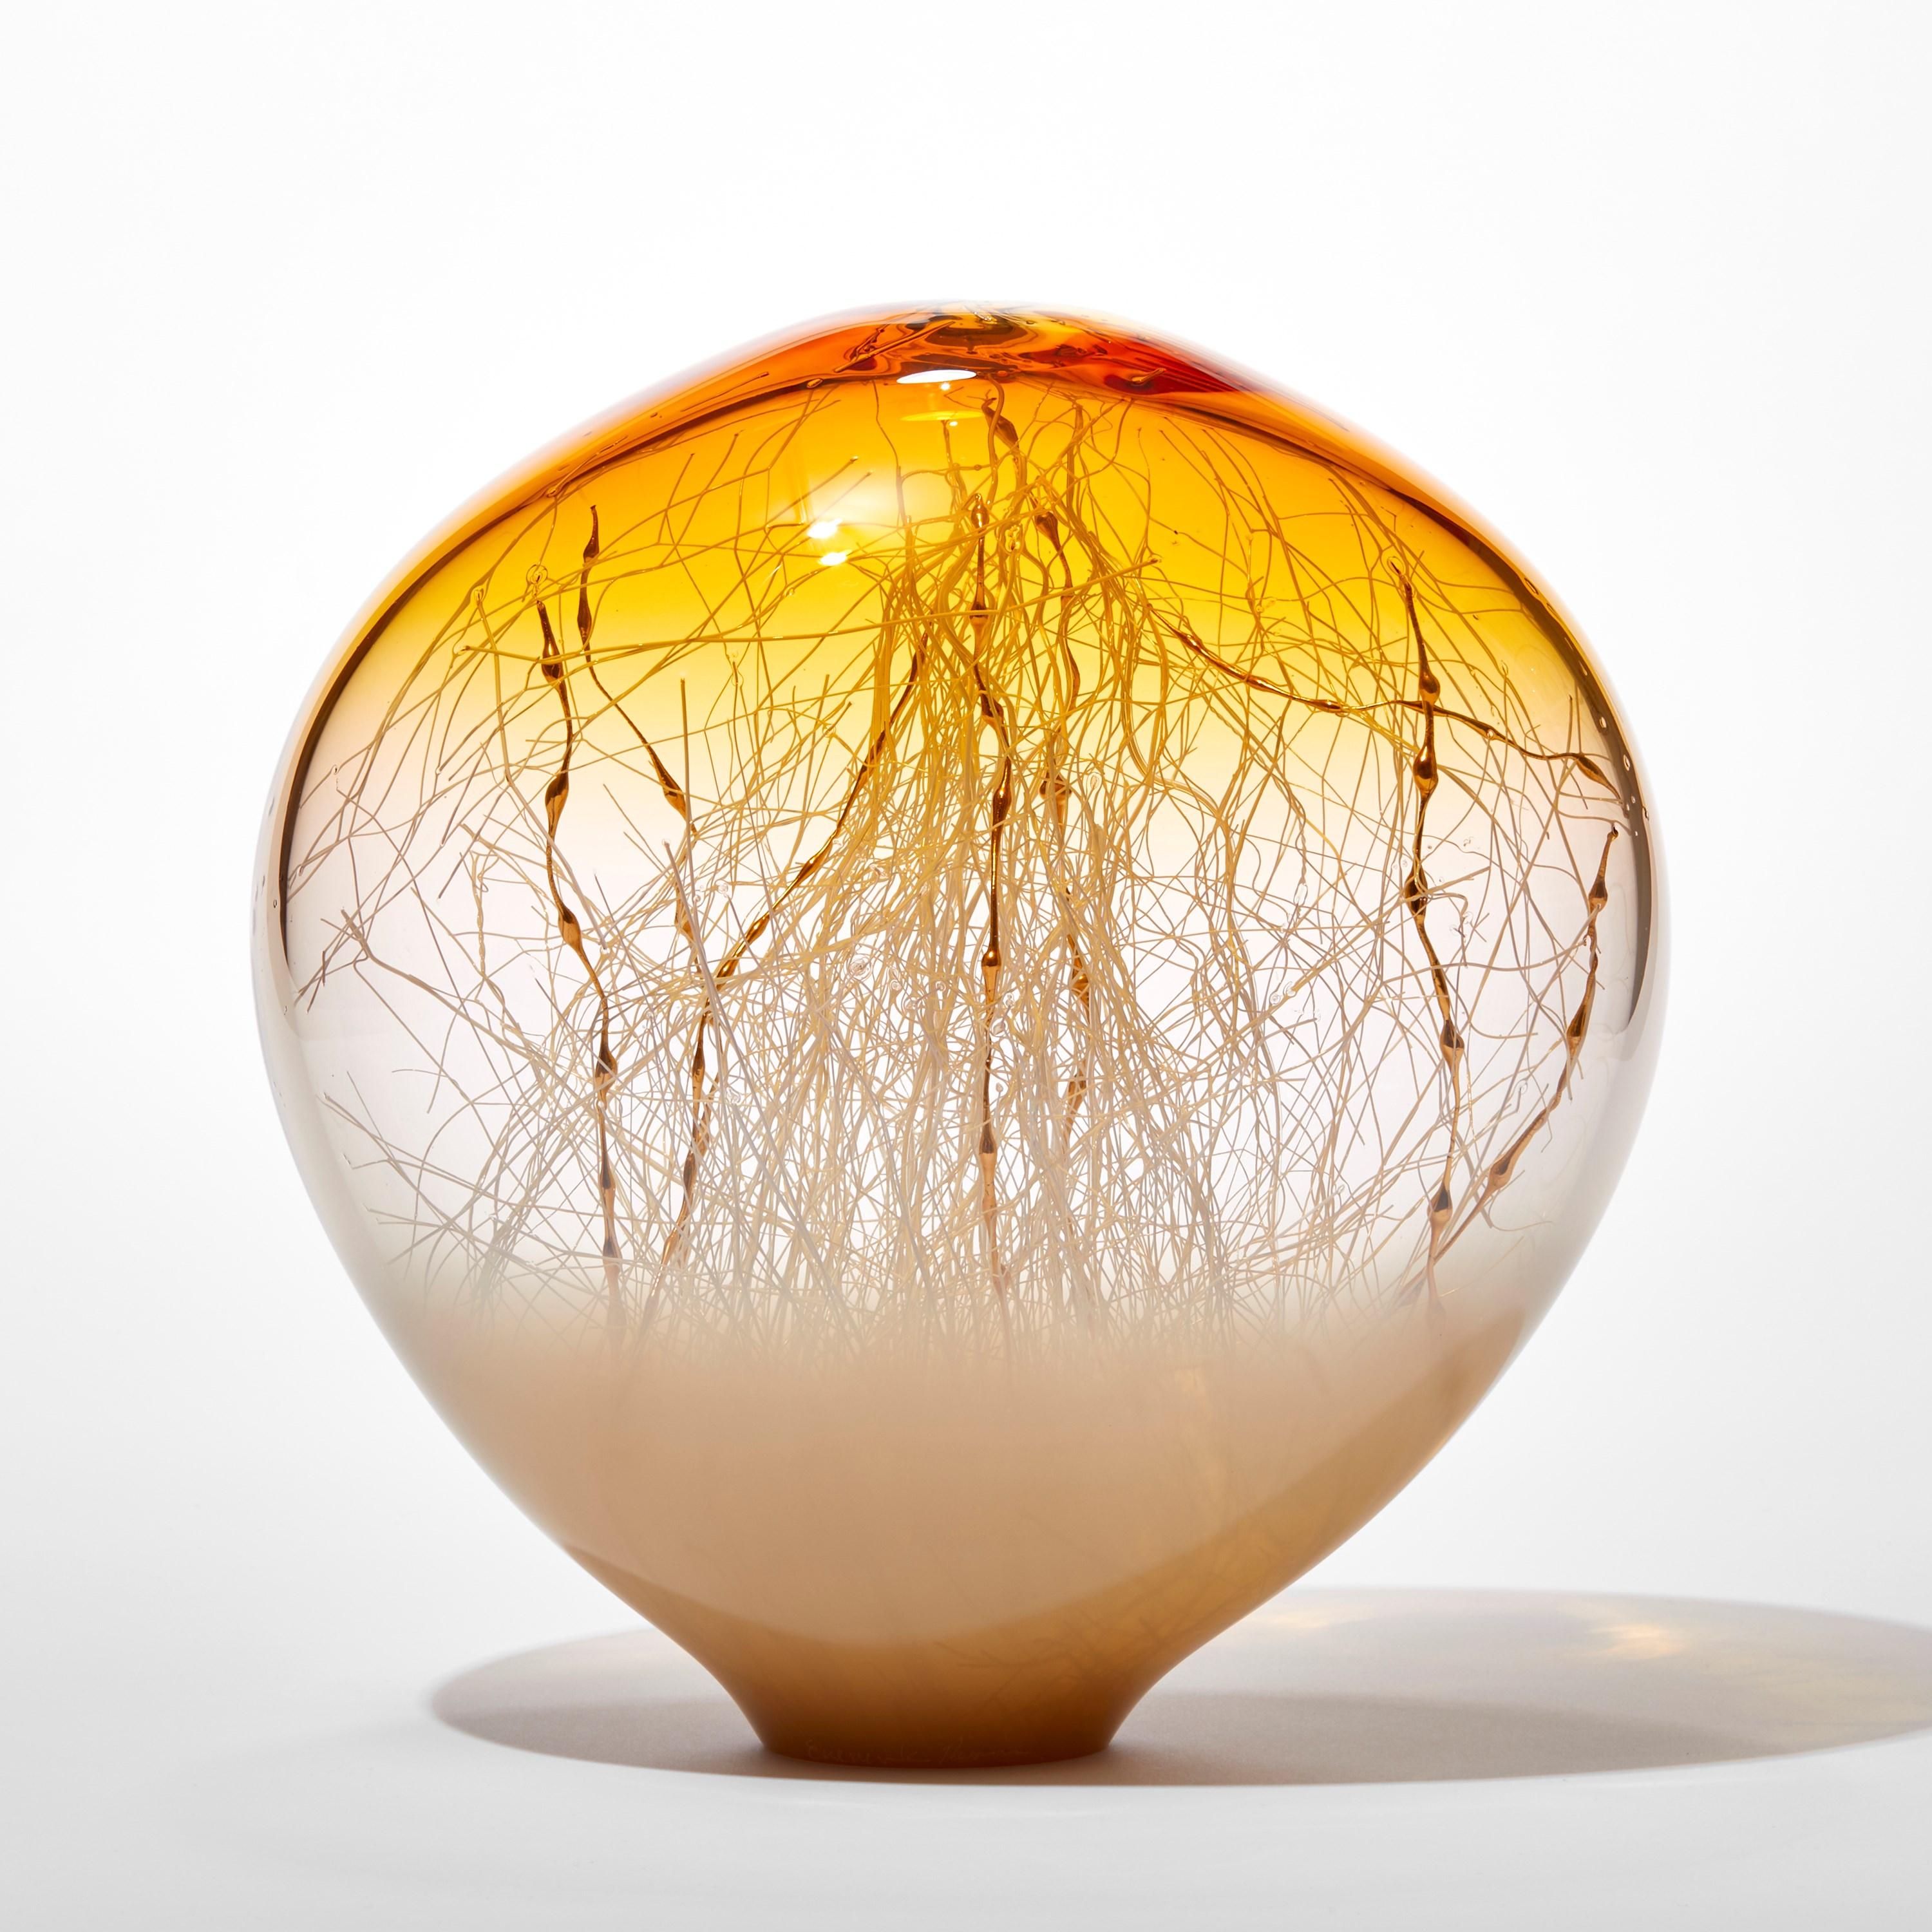 'Elixir in Weimaraner and Sunset Yellow' is a unique handblown and sculpted glass artwork by the Danish and British artists, Hanne Enemark & Louis Thompson.

The outer glass form contains a multitude of fine white canes of glass, some of which have